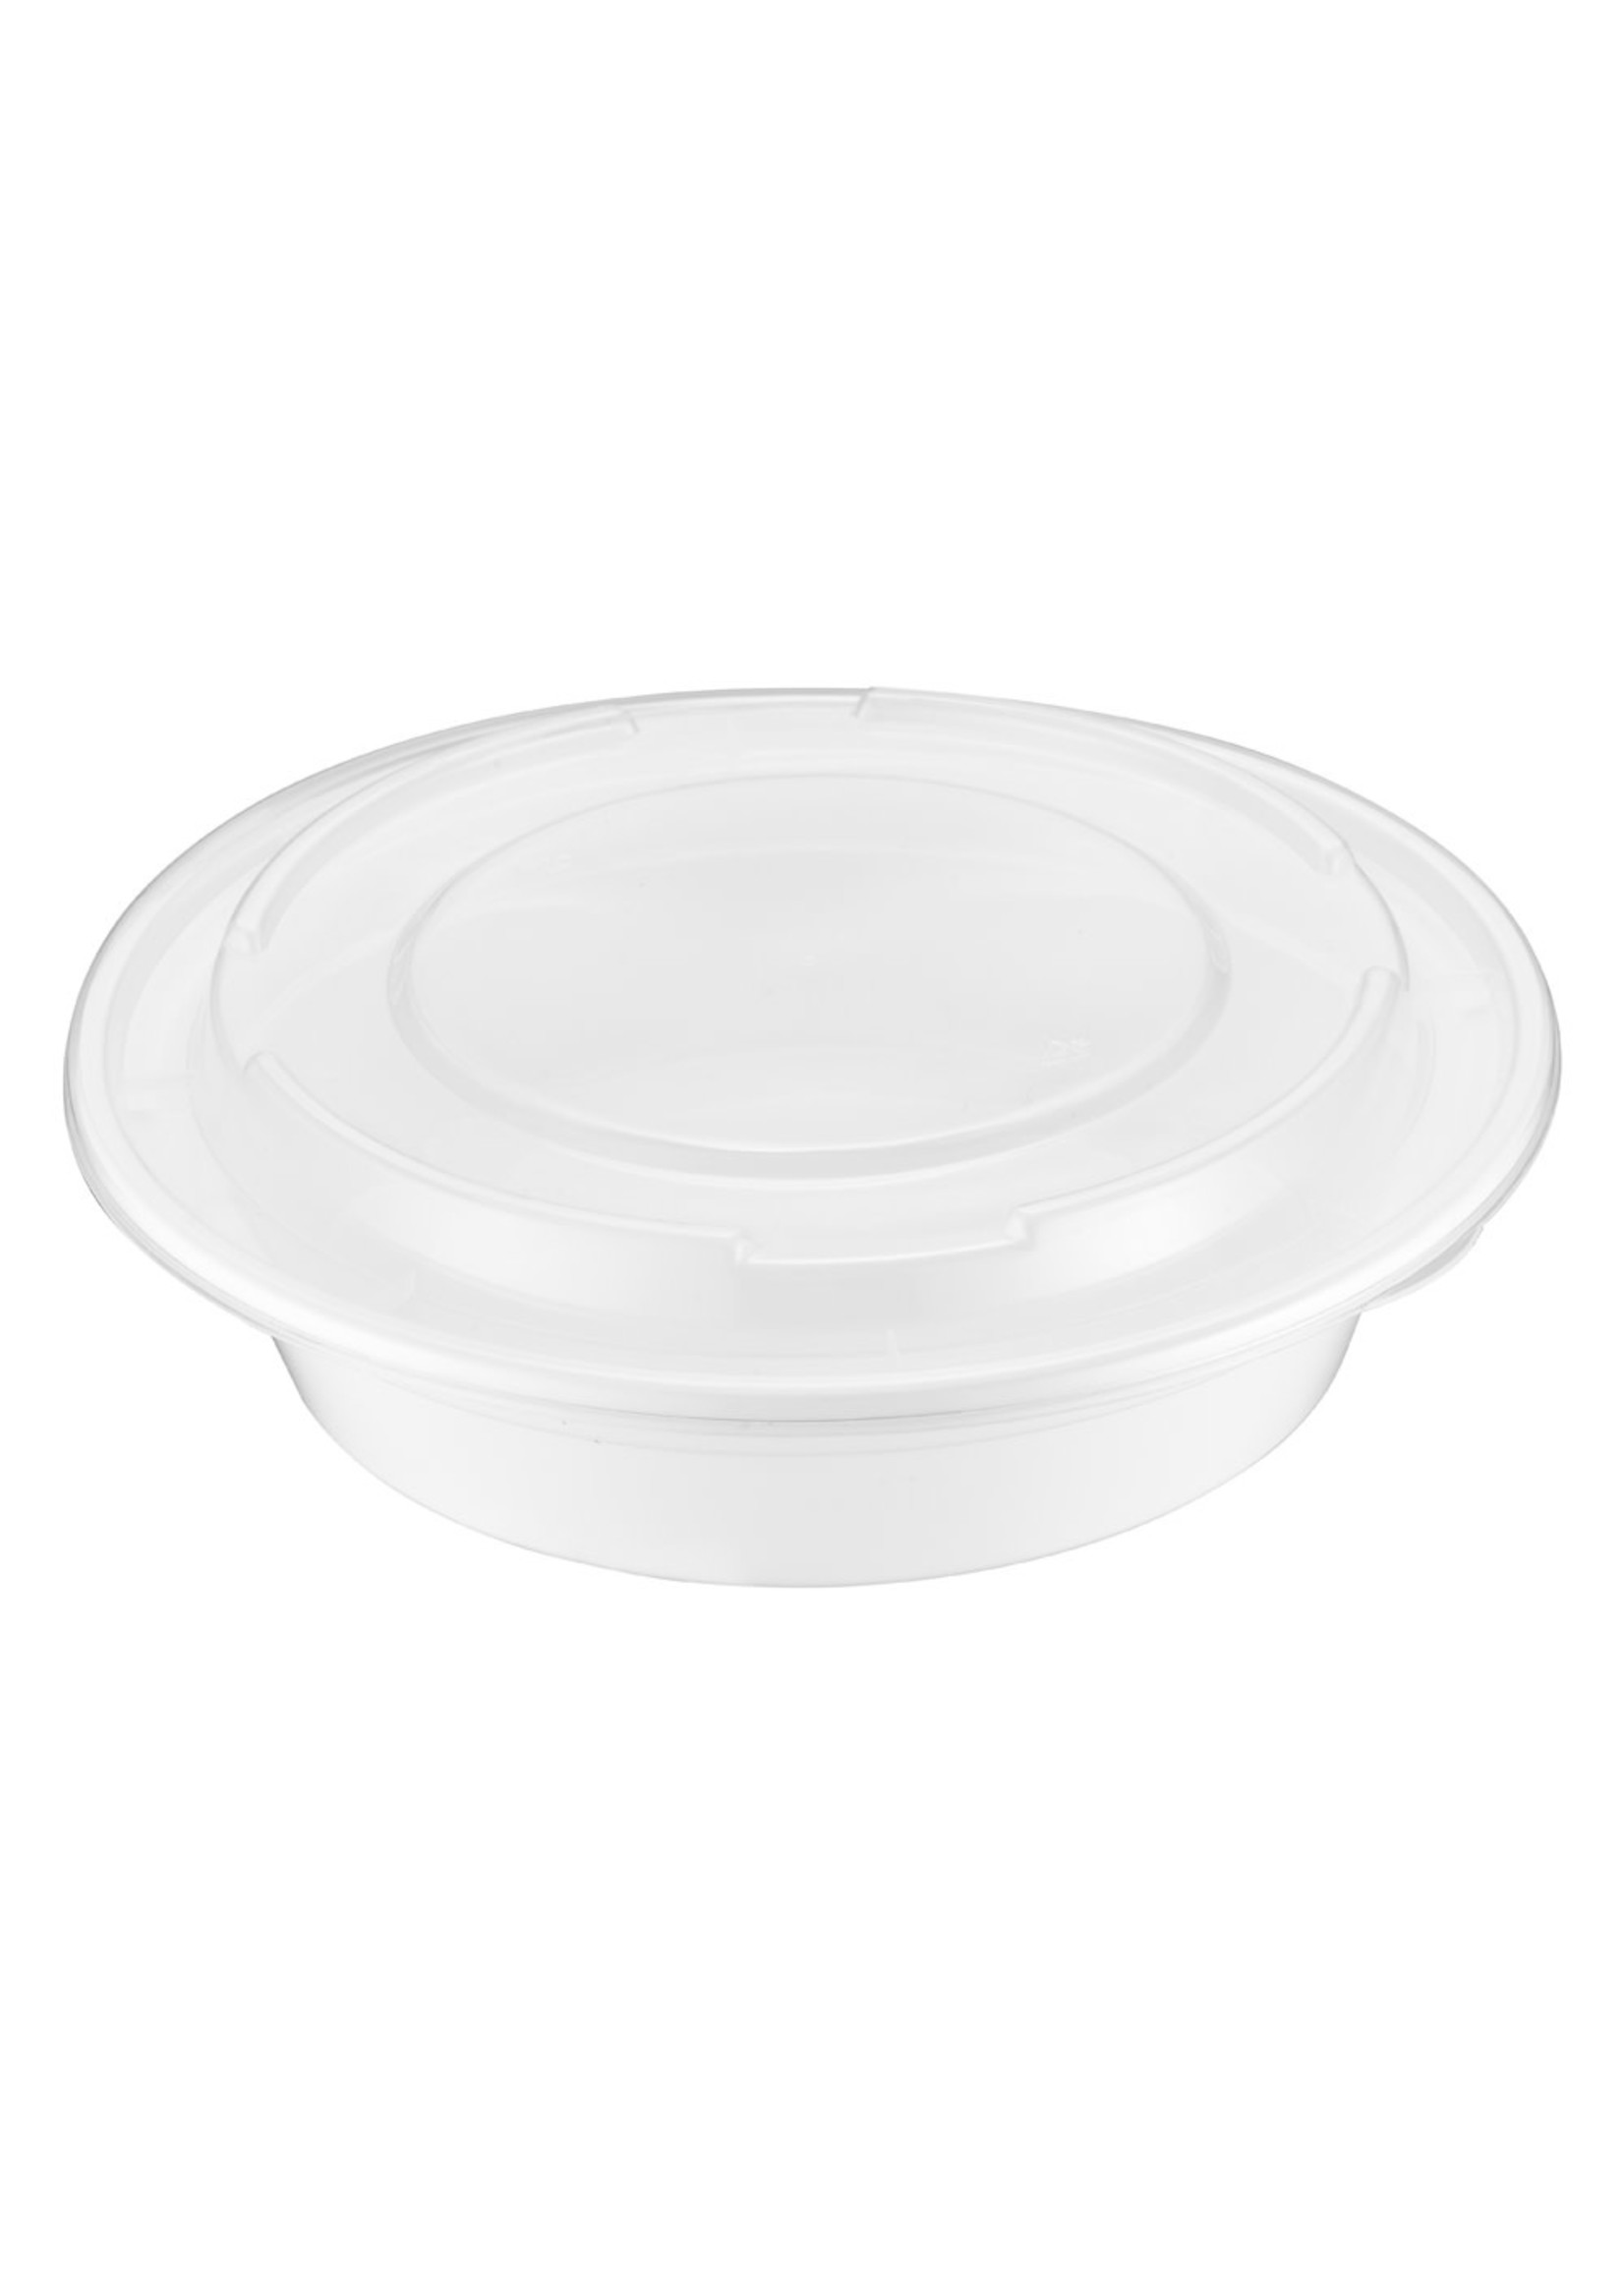 Gladway TY-R24W / RDWH24 - 24oz Round Microwaveable Container with Lid, White, 150 sets (50/6)